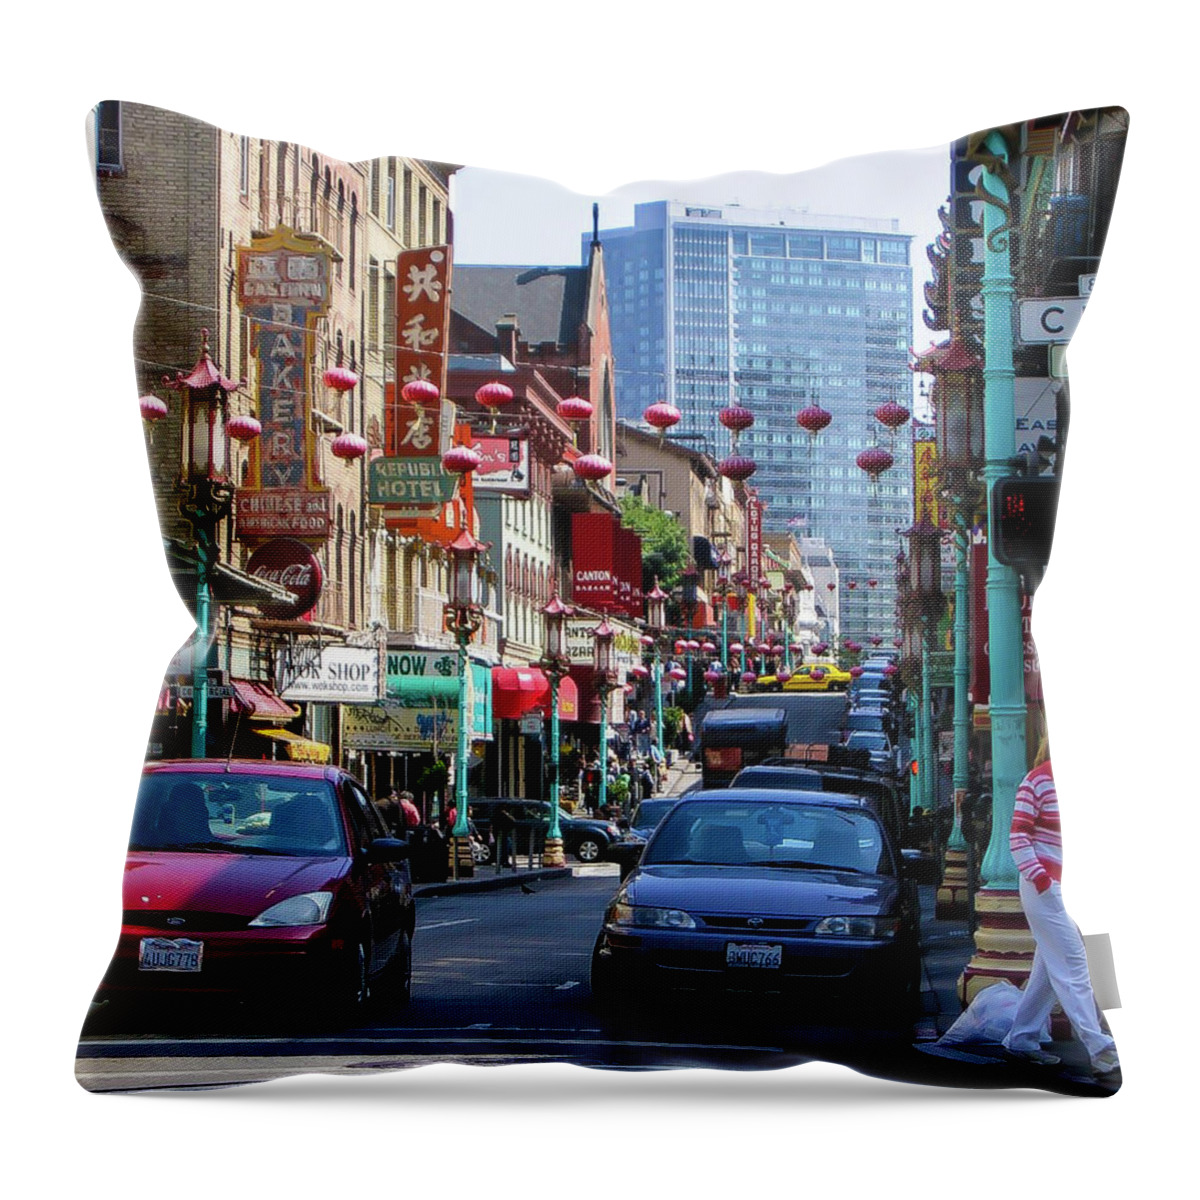 Chinatown Throw Pillow featuring the digital art China Town SF by Ed Stines